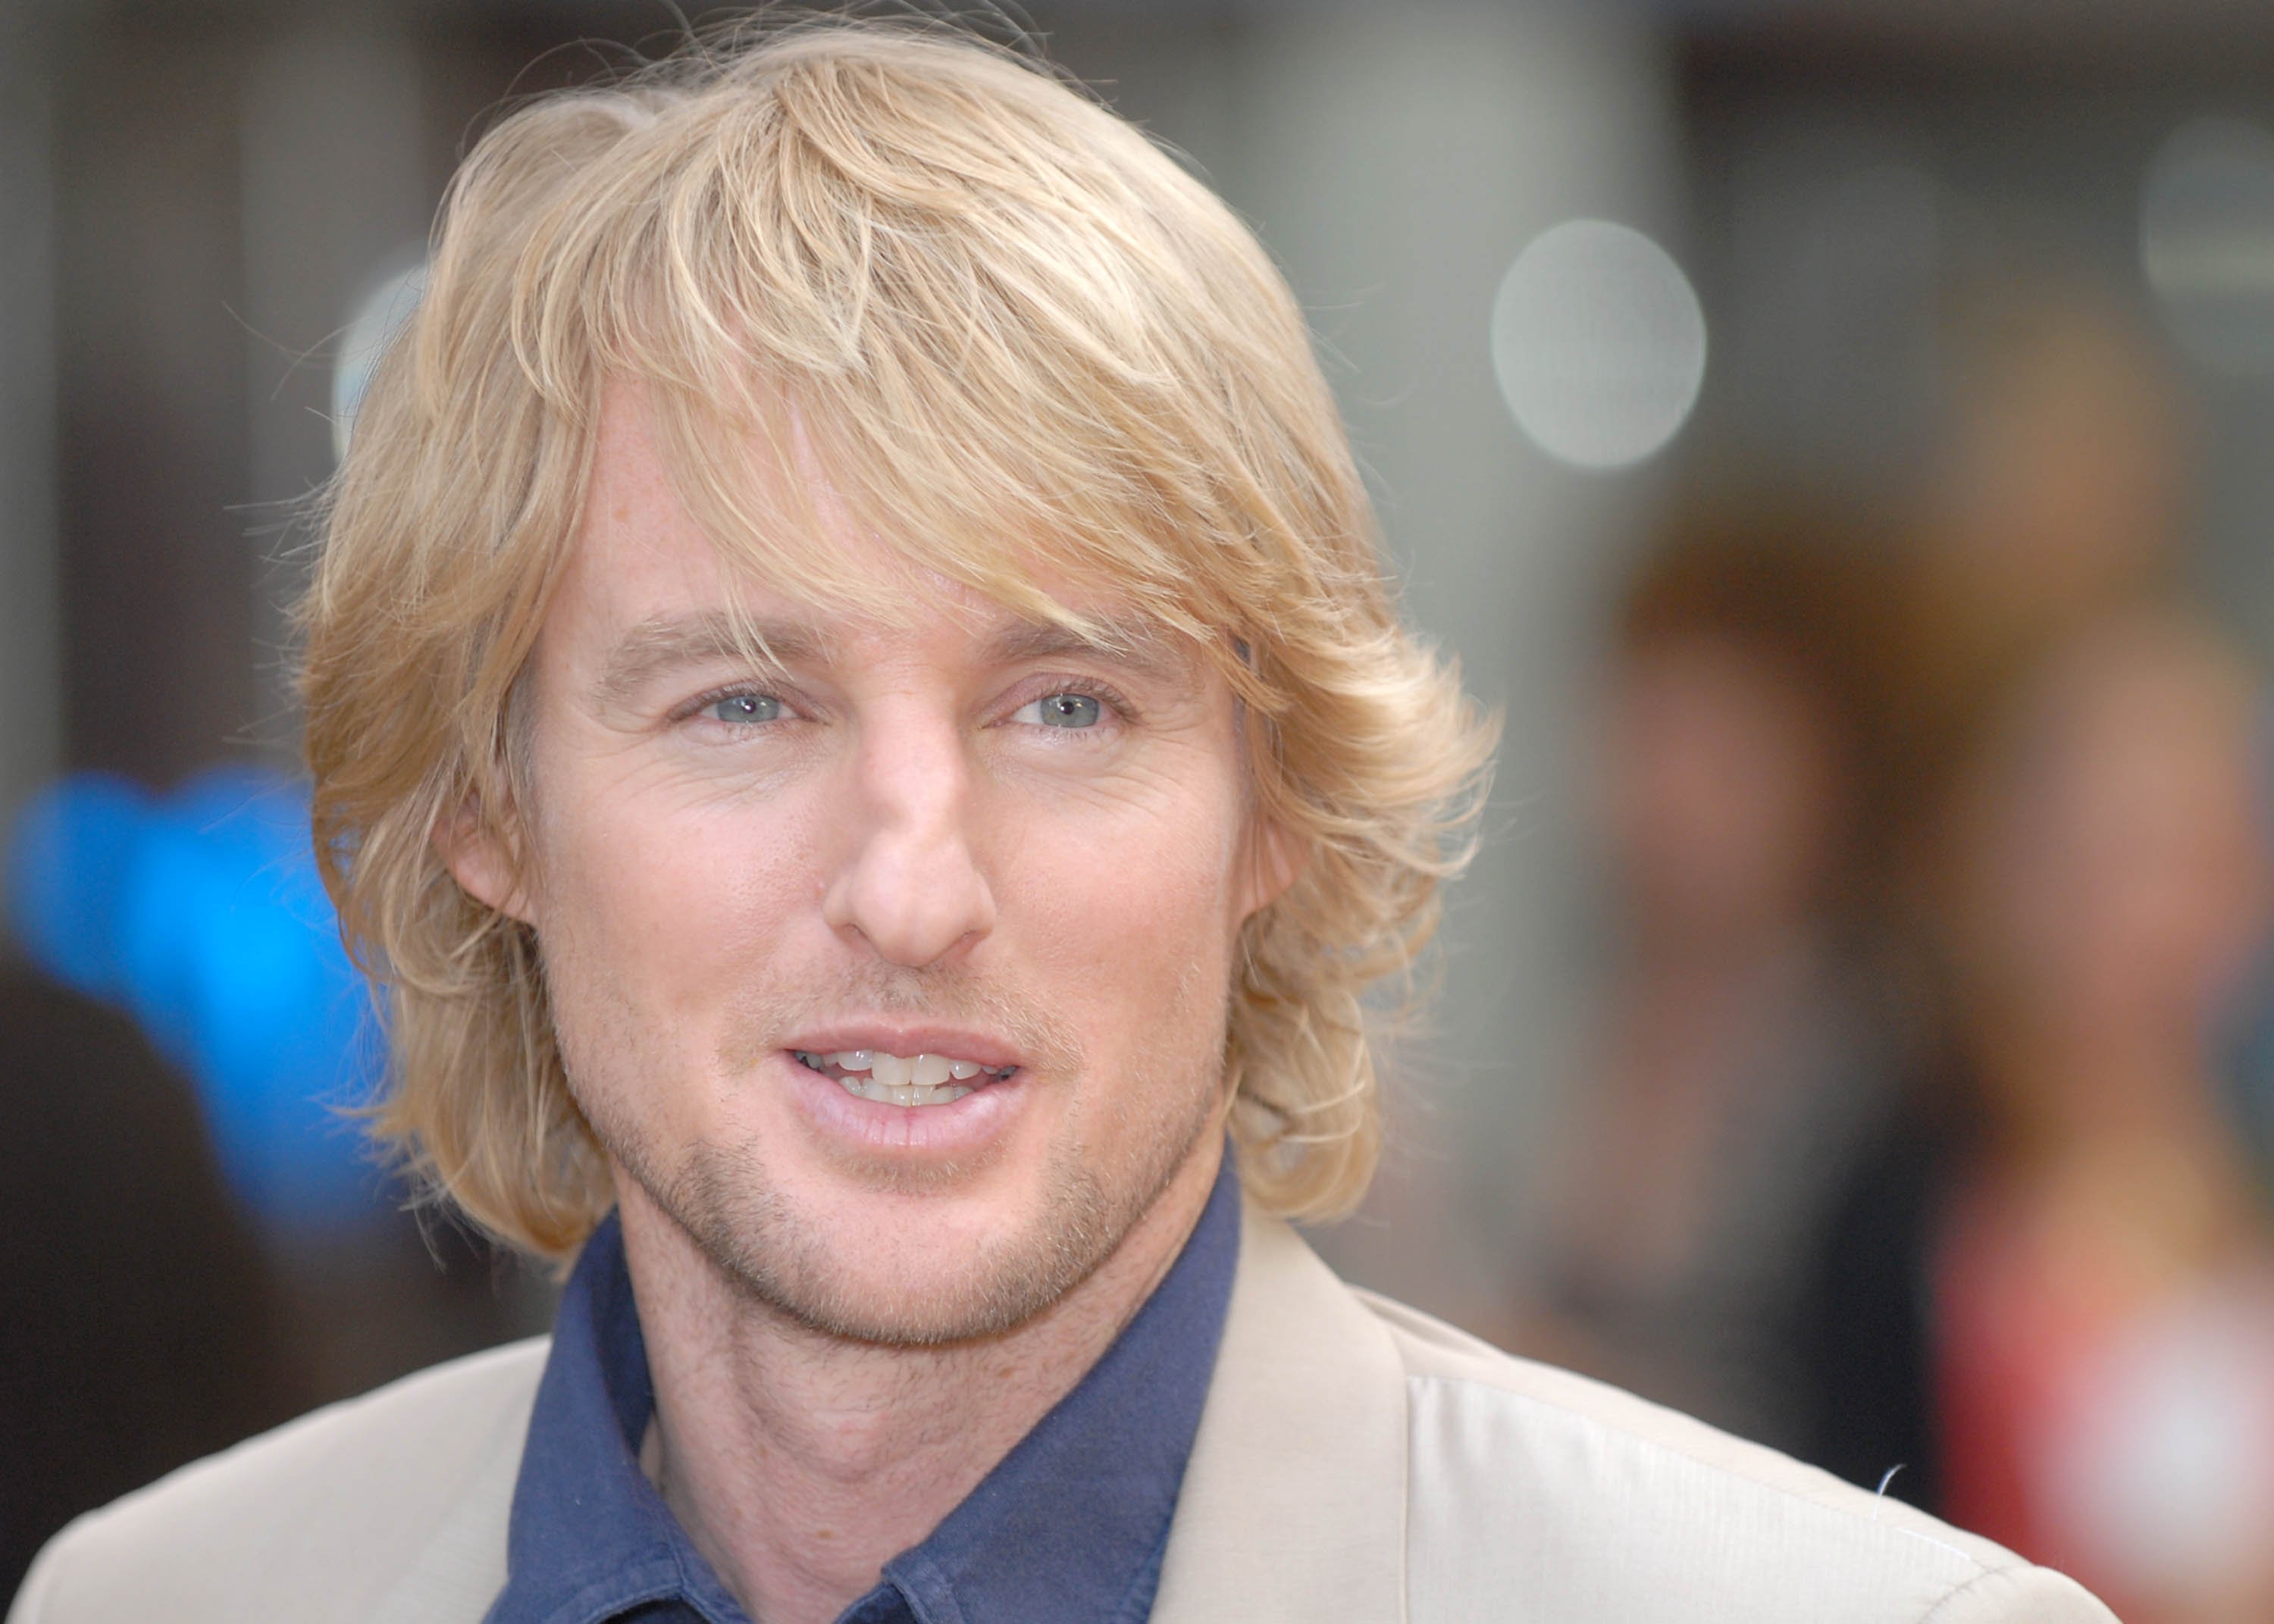 Comedian Owen Wilson attending the "You, Me and Dupree" London Premiere | Source: Getty Images 